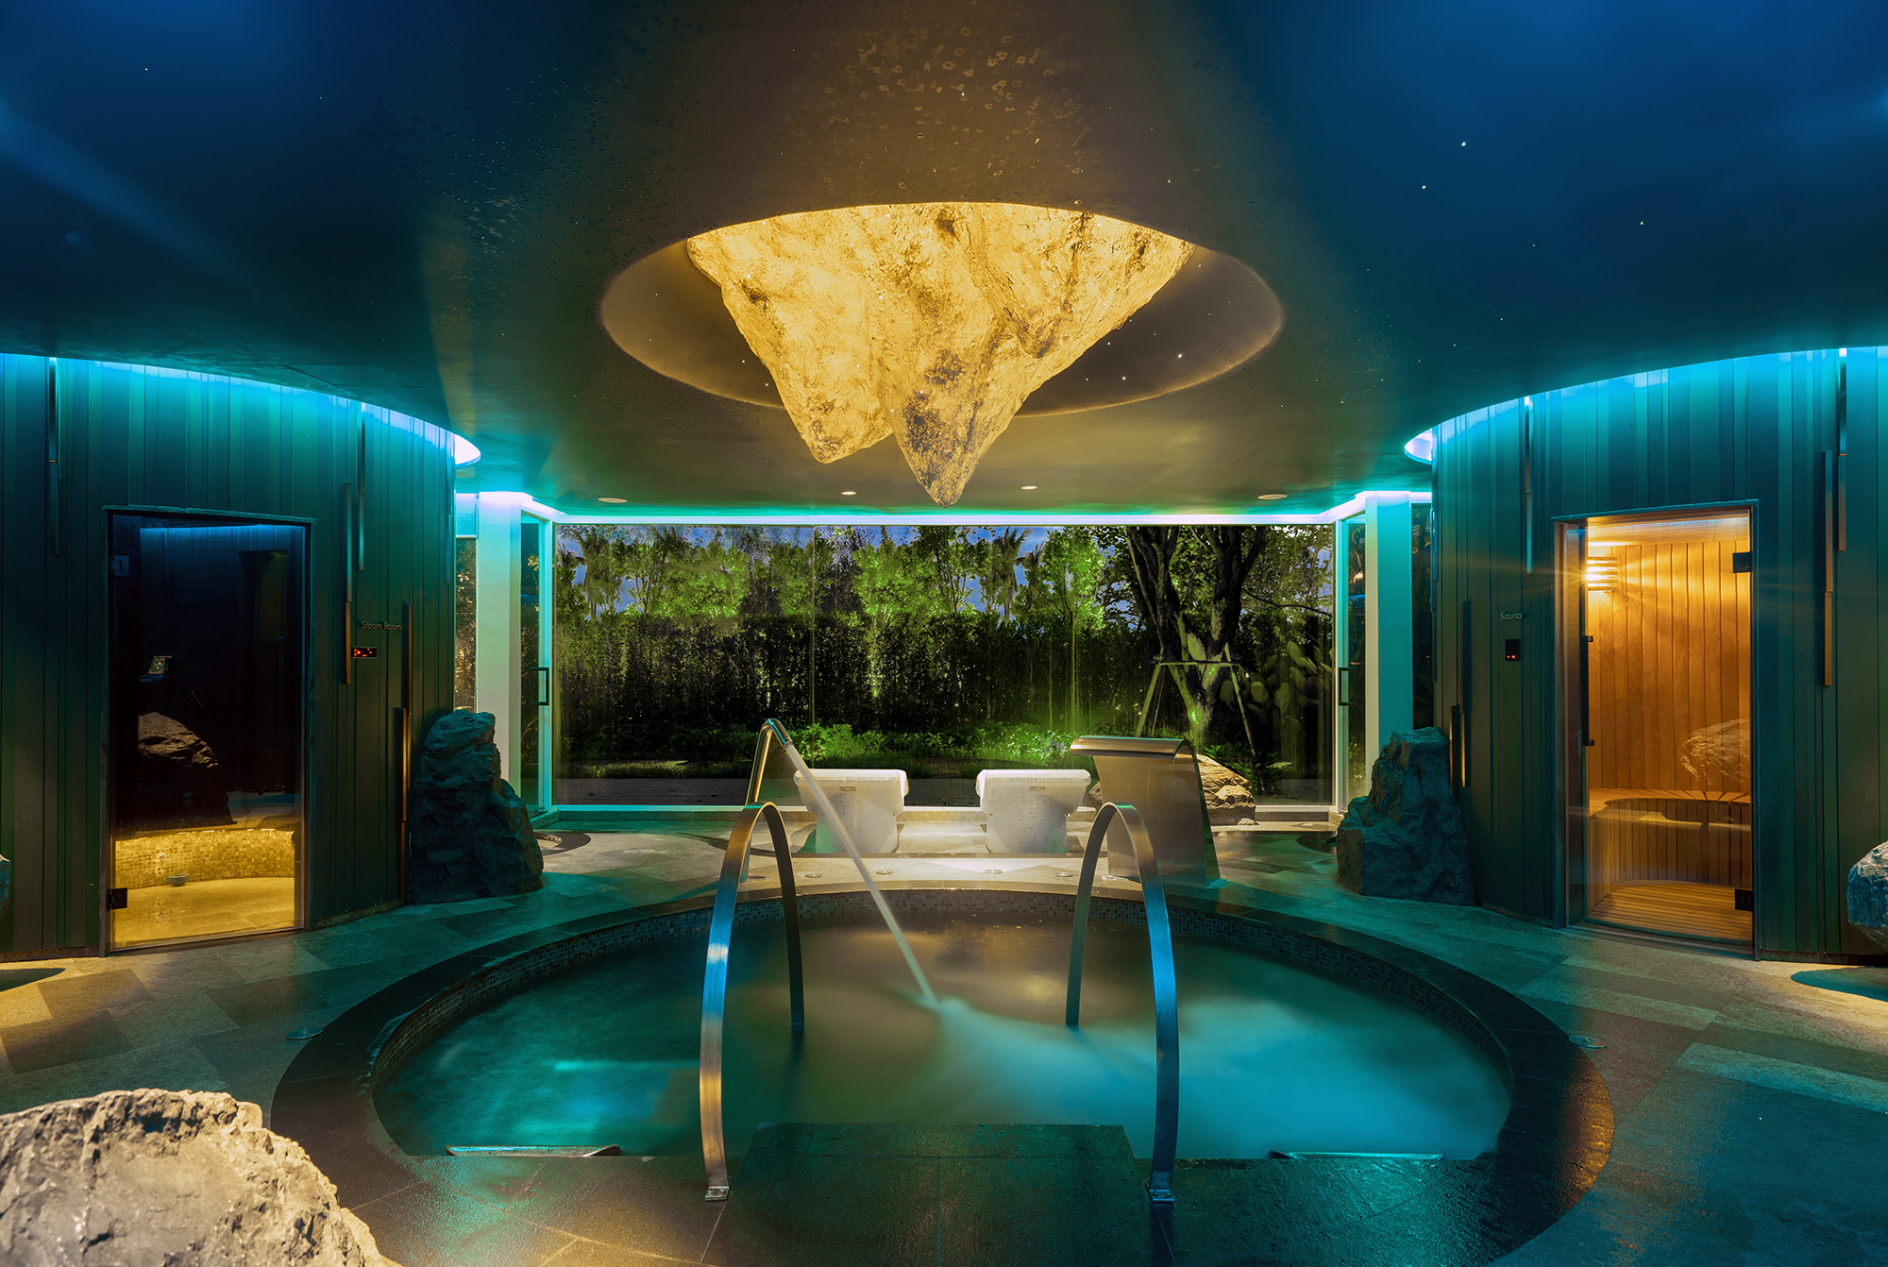 The Rainforest at Banyan Tree Krabi - a maze of hydrotherapeutic stations, including a steam room and sauna, ice fountain, jet pool, and an array of waterjets designed to simultaneously stimulate and soothe the body and mind. Click to enlarge.